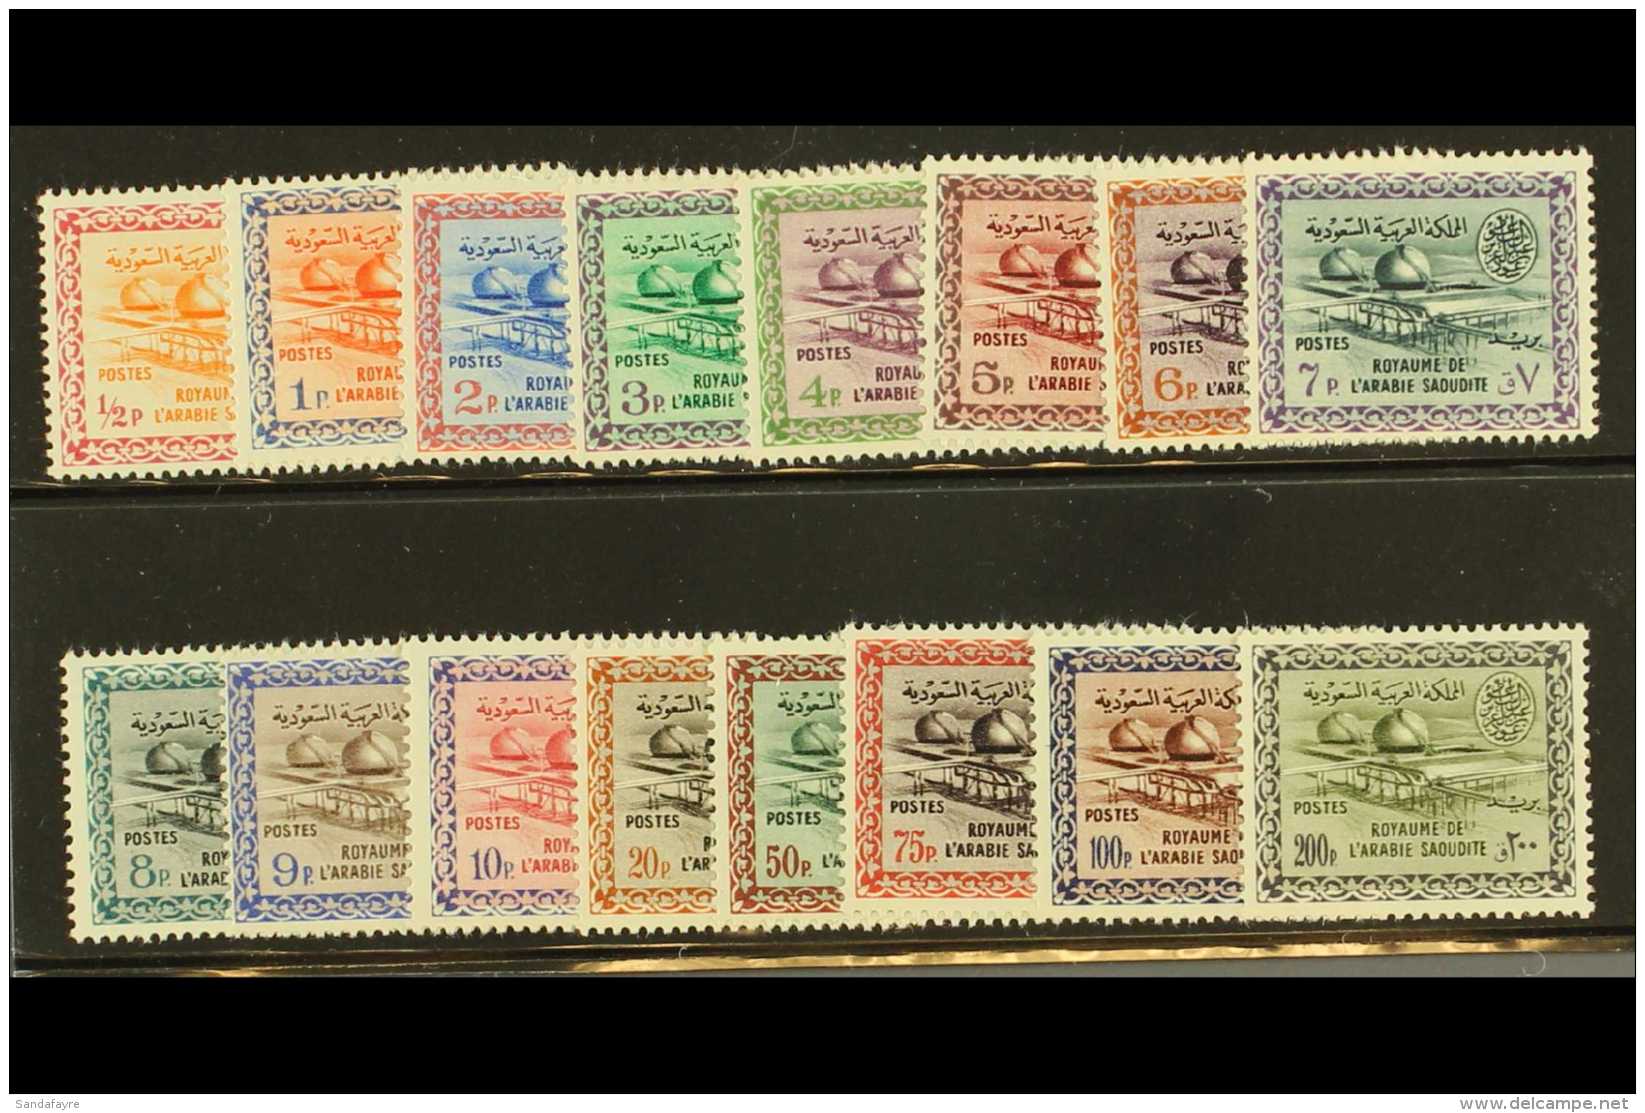 1960-61 Gas Oil Plant Complete Definitive Set, SG 396/411, Never Hinged Mint. (16 Stamps) For More Images, Please... - Arabie Saoudite